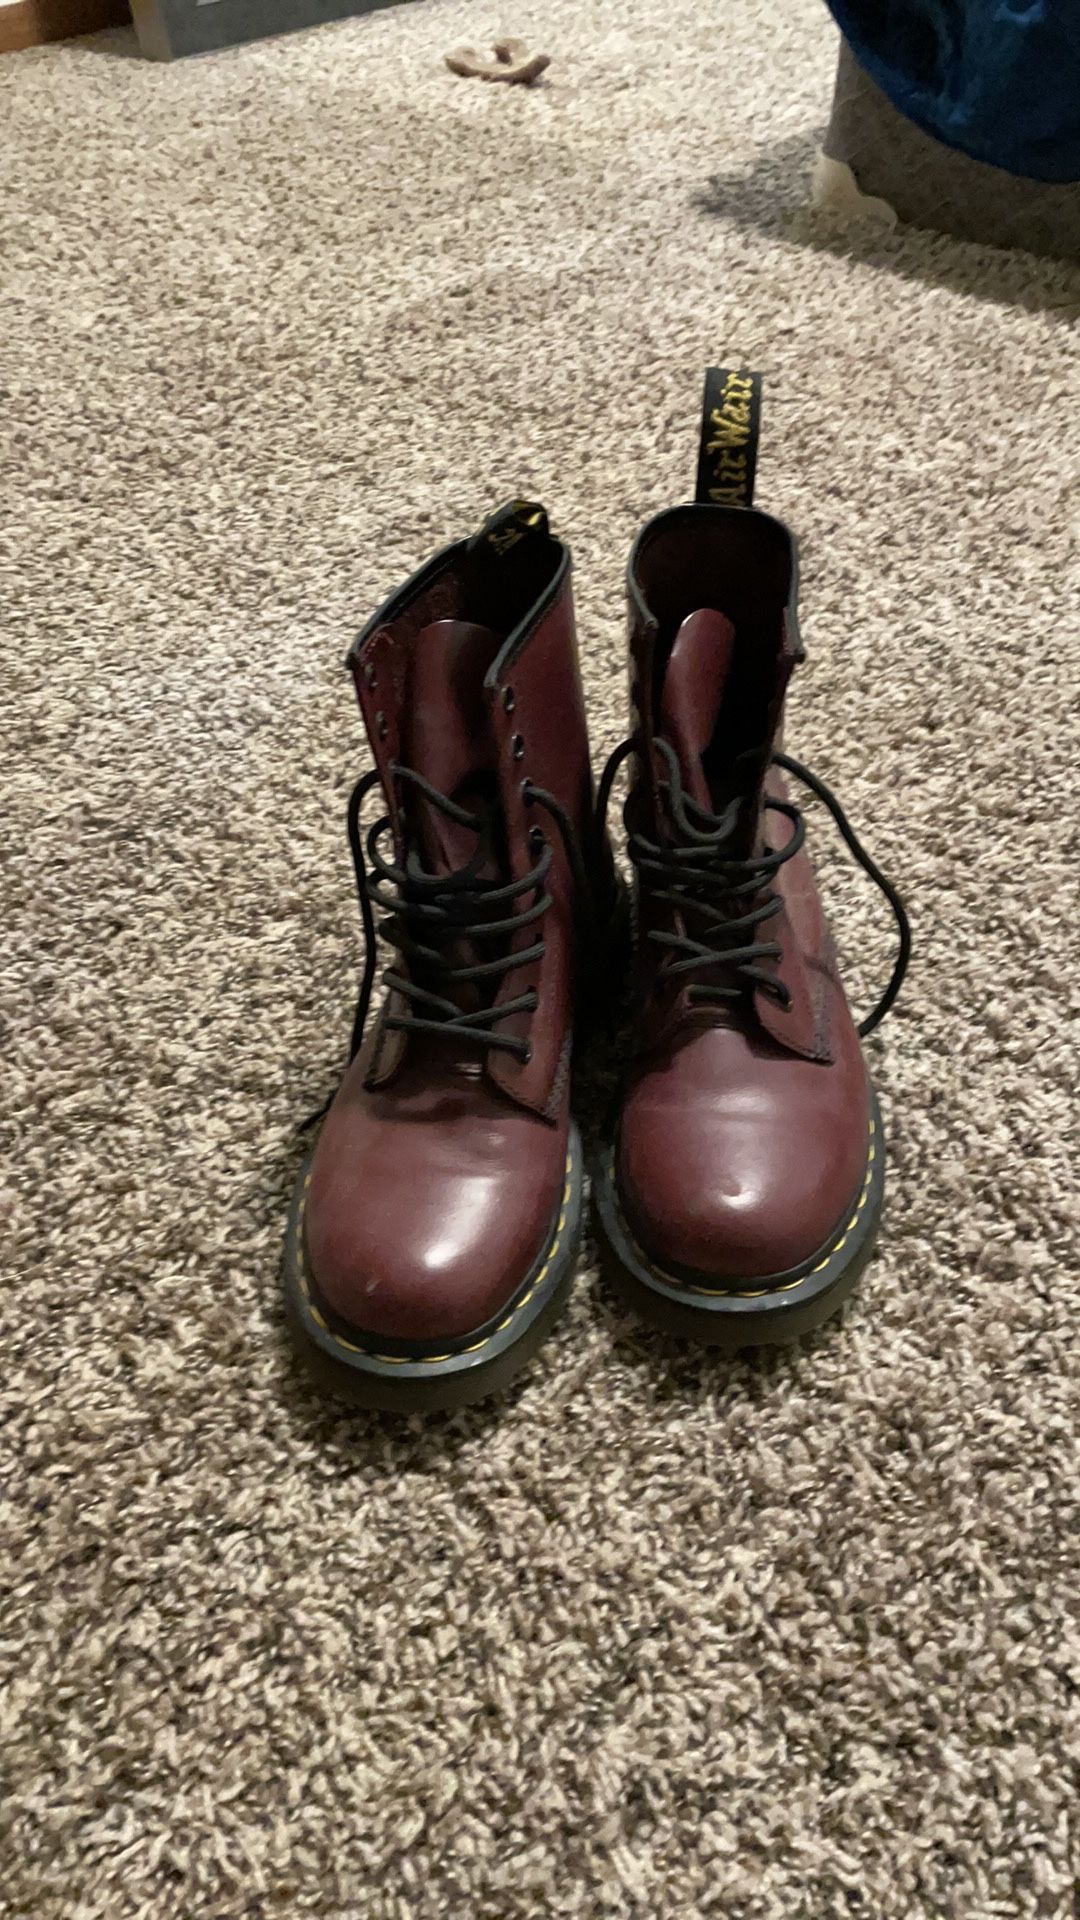 Dr. Marten’s 1460 Lace-up Boots (Maroon)